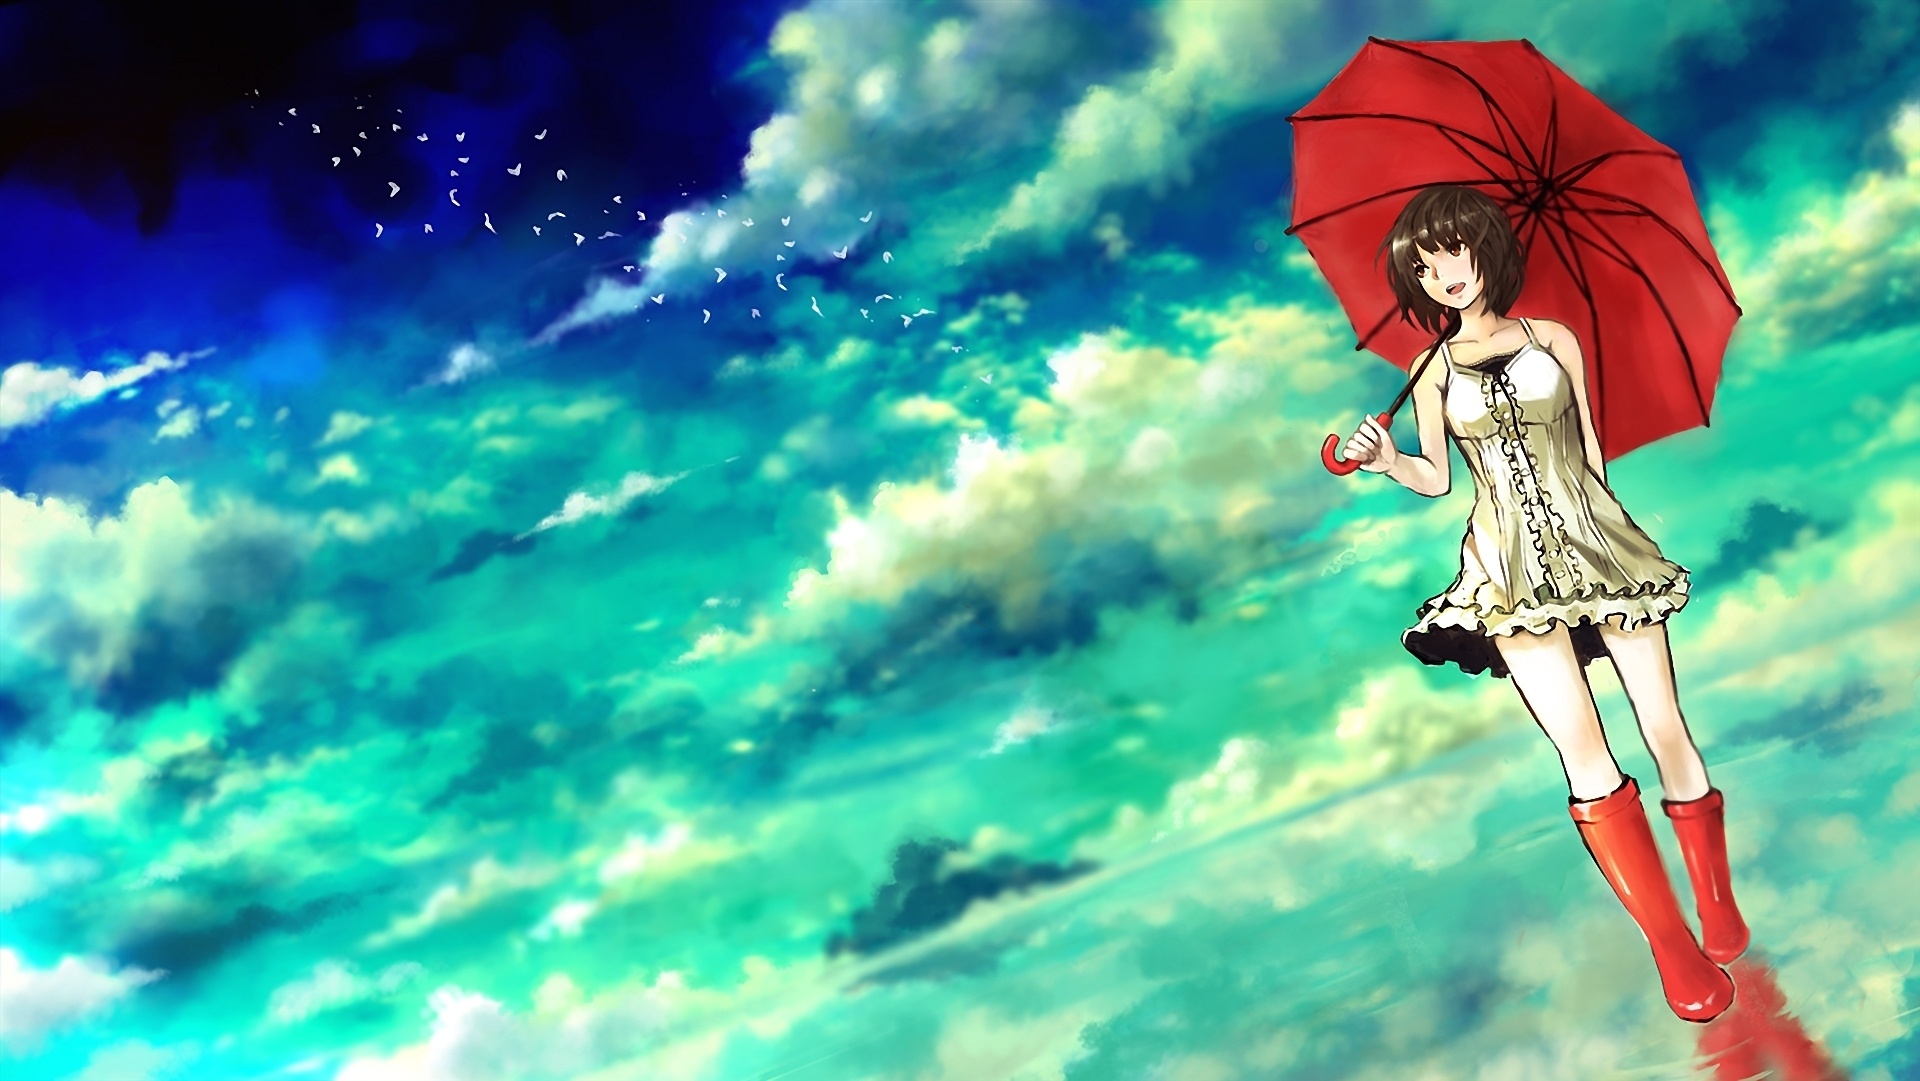 Anime 1920x1081 anime anime girls brunette brown eyes umbrella sky clouds smiling turquoise